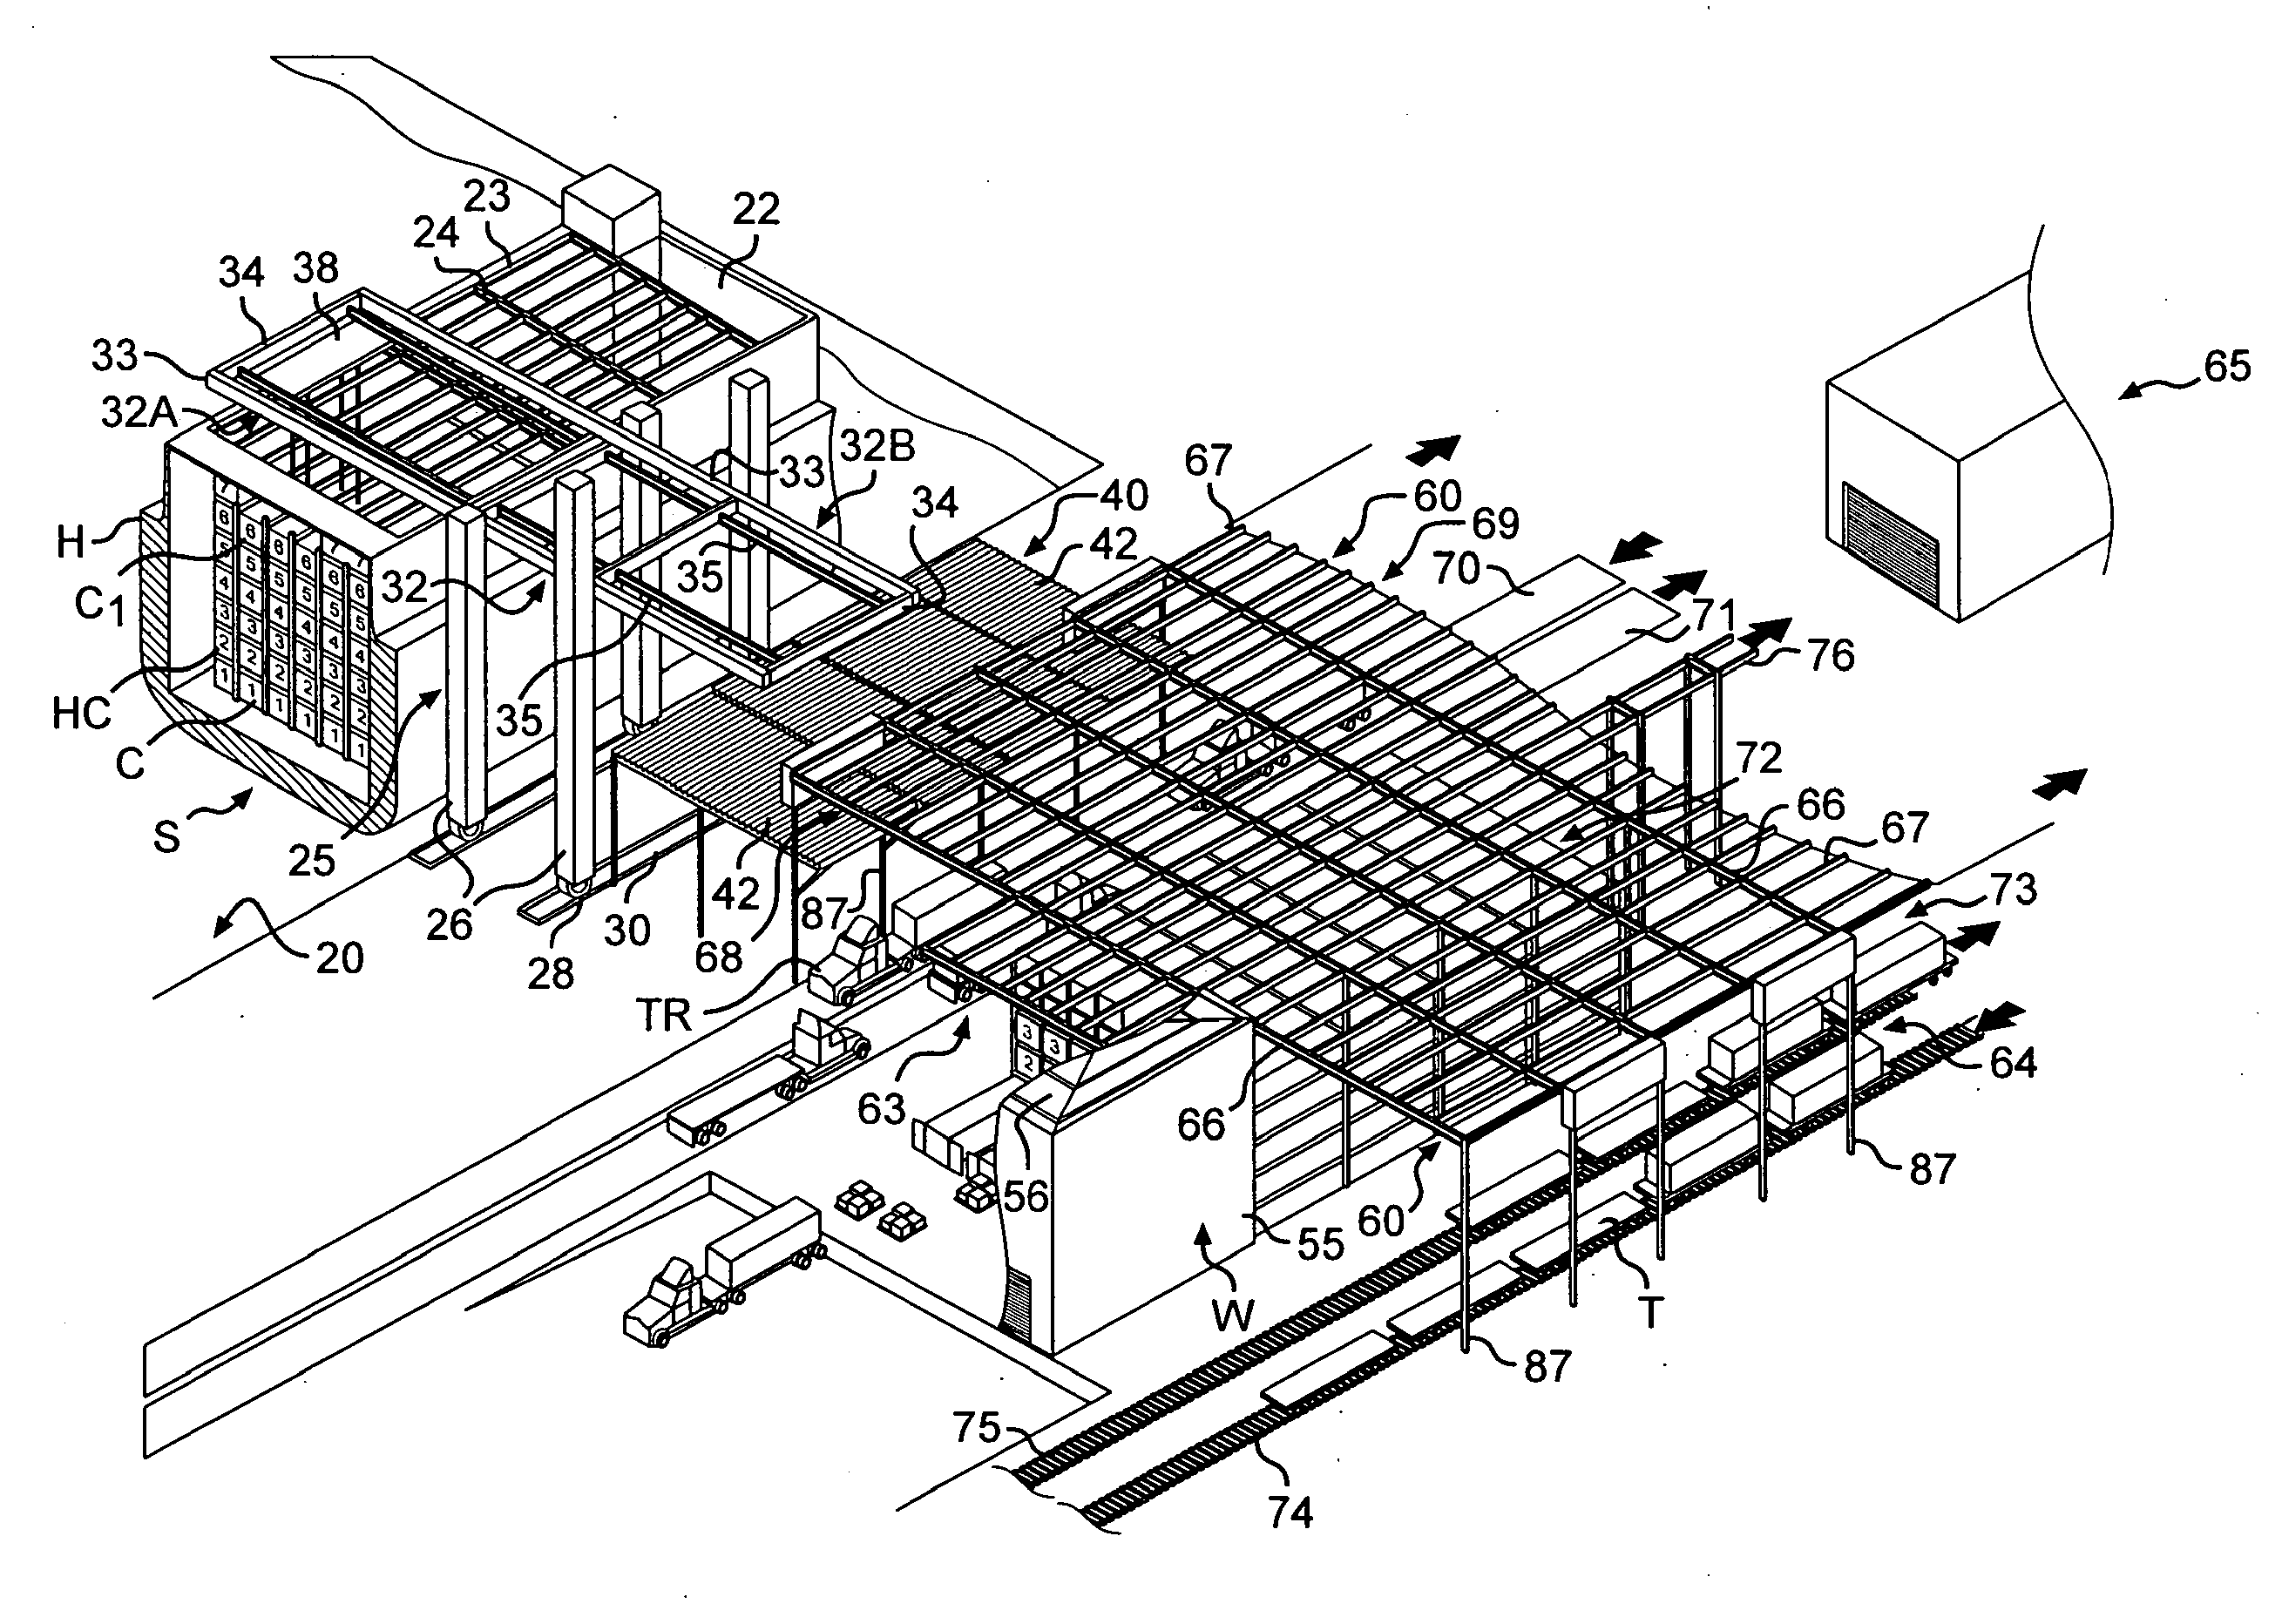 Port storage and distribution system for international shipping containers